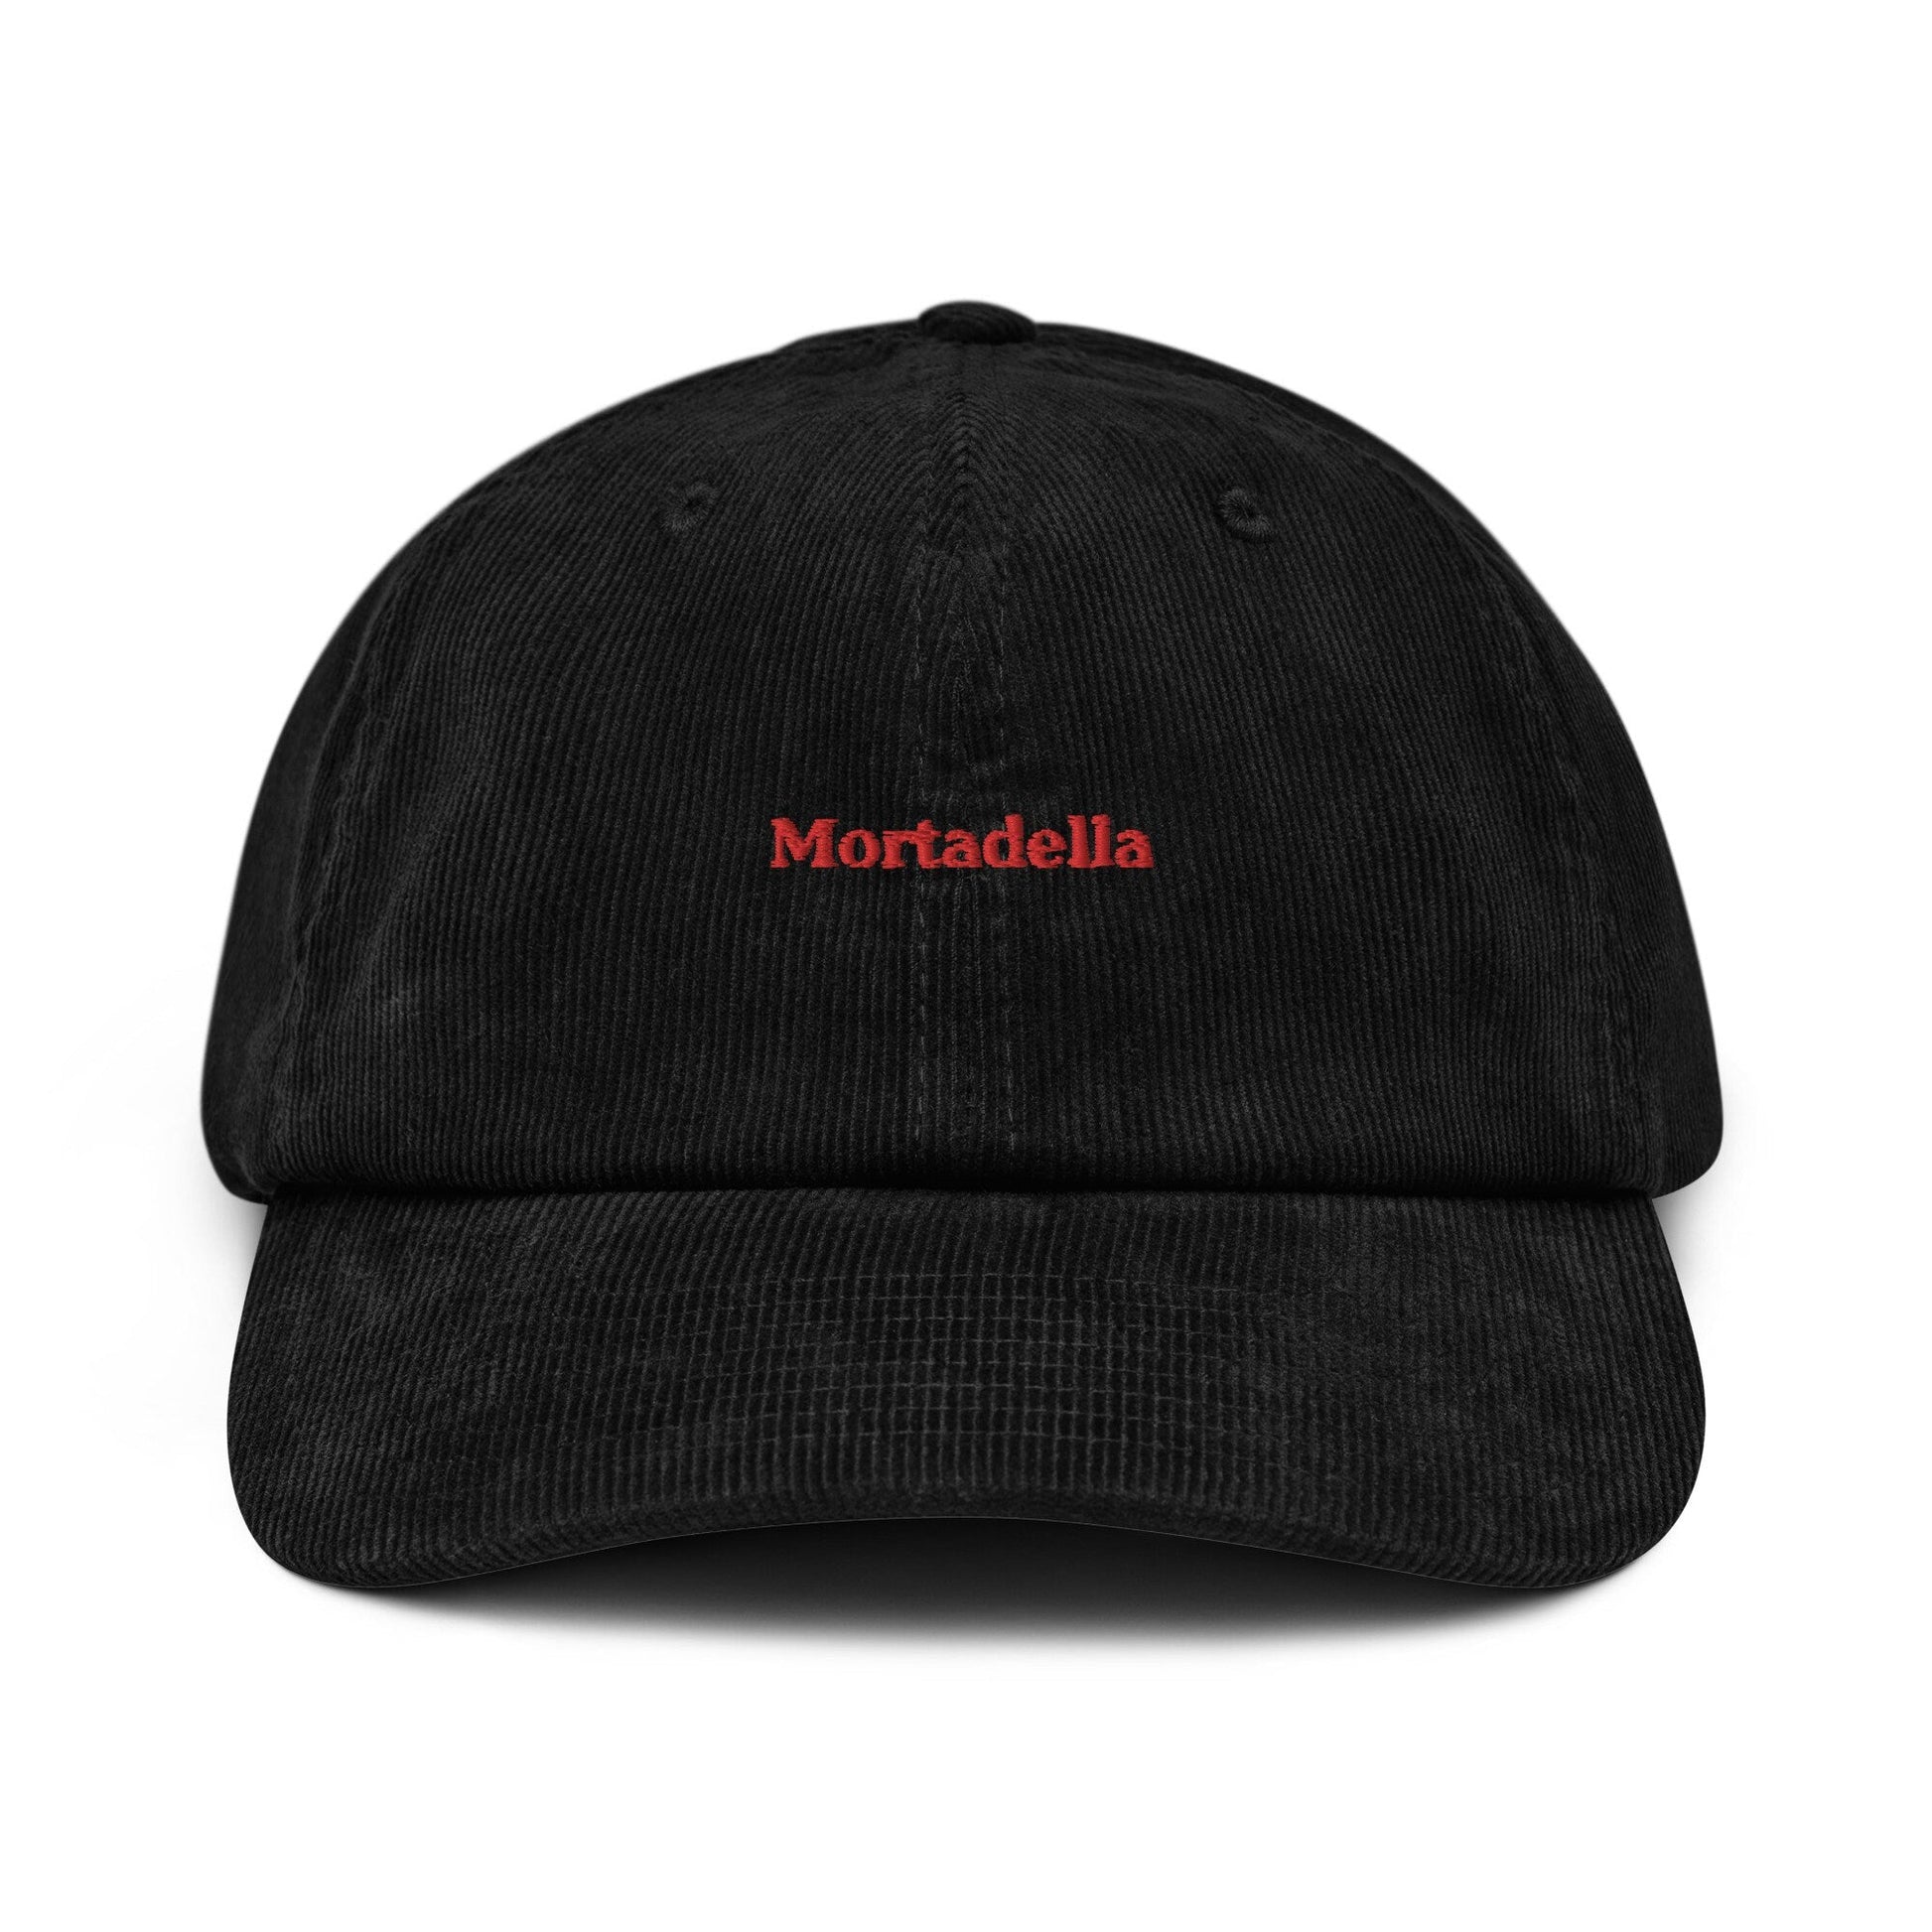 Mortadella Corduroy Dad Hat - Gift for charcuterie and Italian food Lovers - Handmade Embroidered Cap